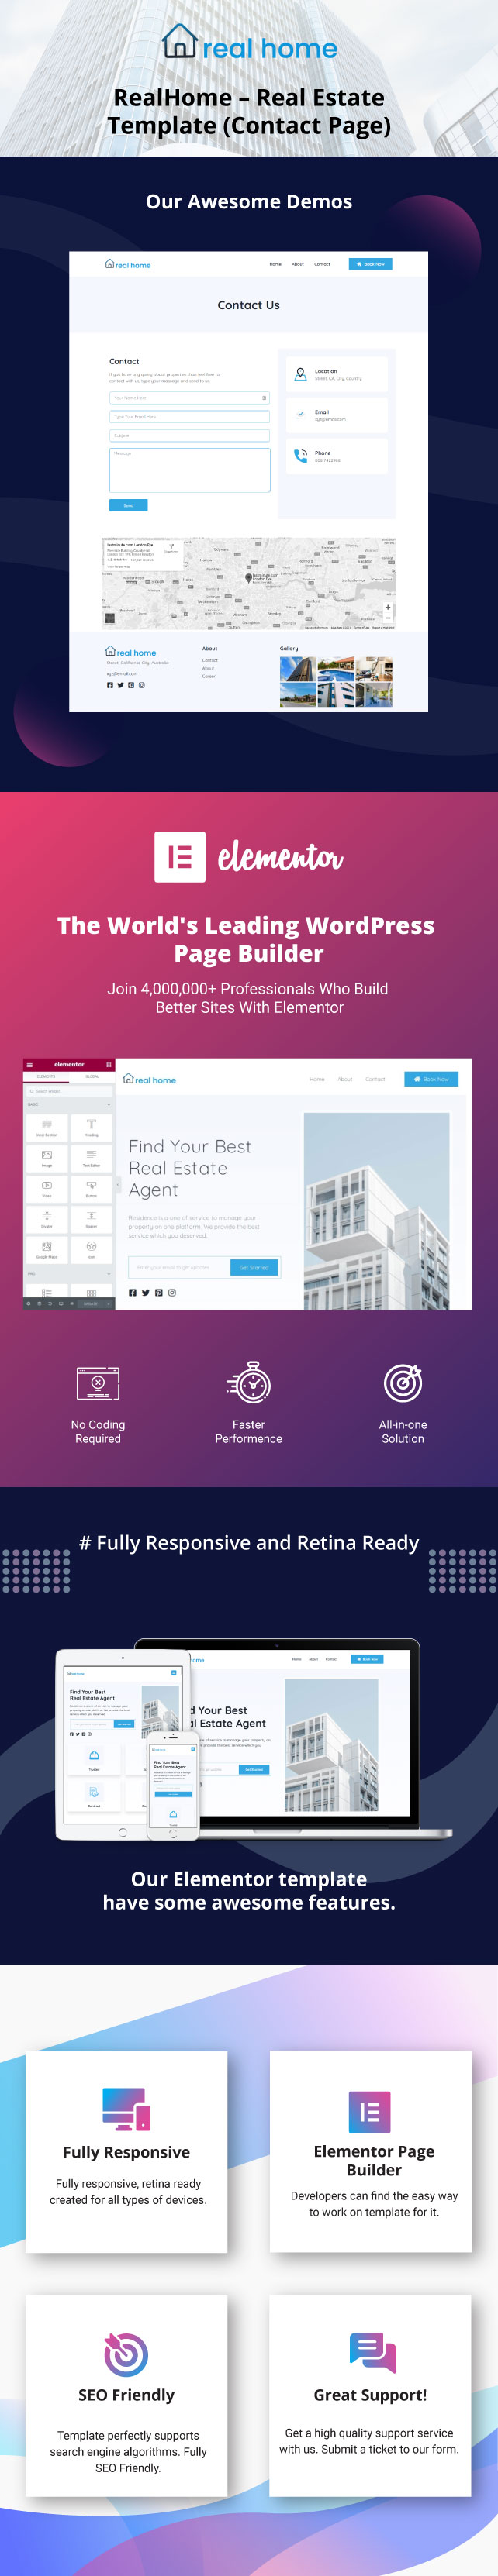 realhome-real-estate-template-contact-page